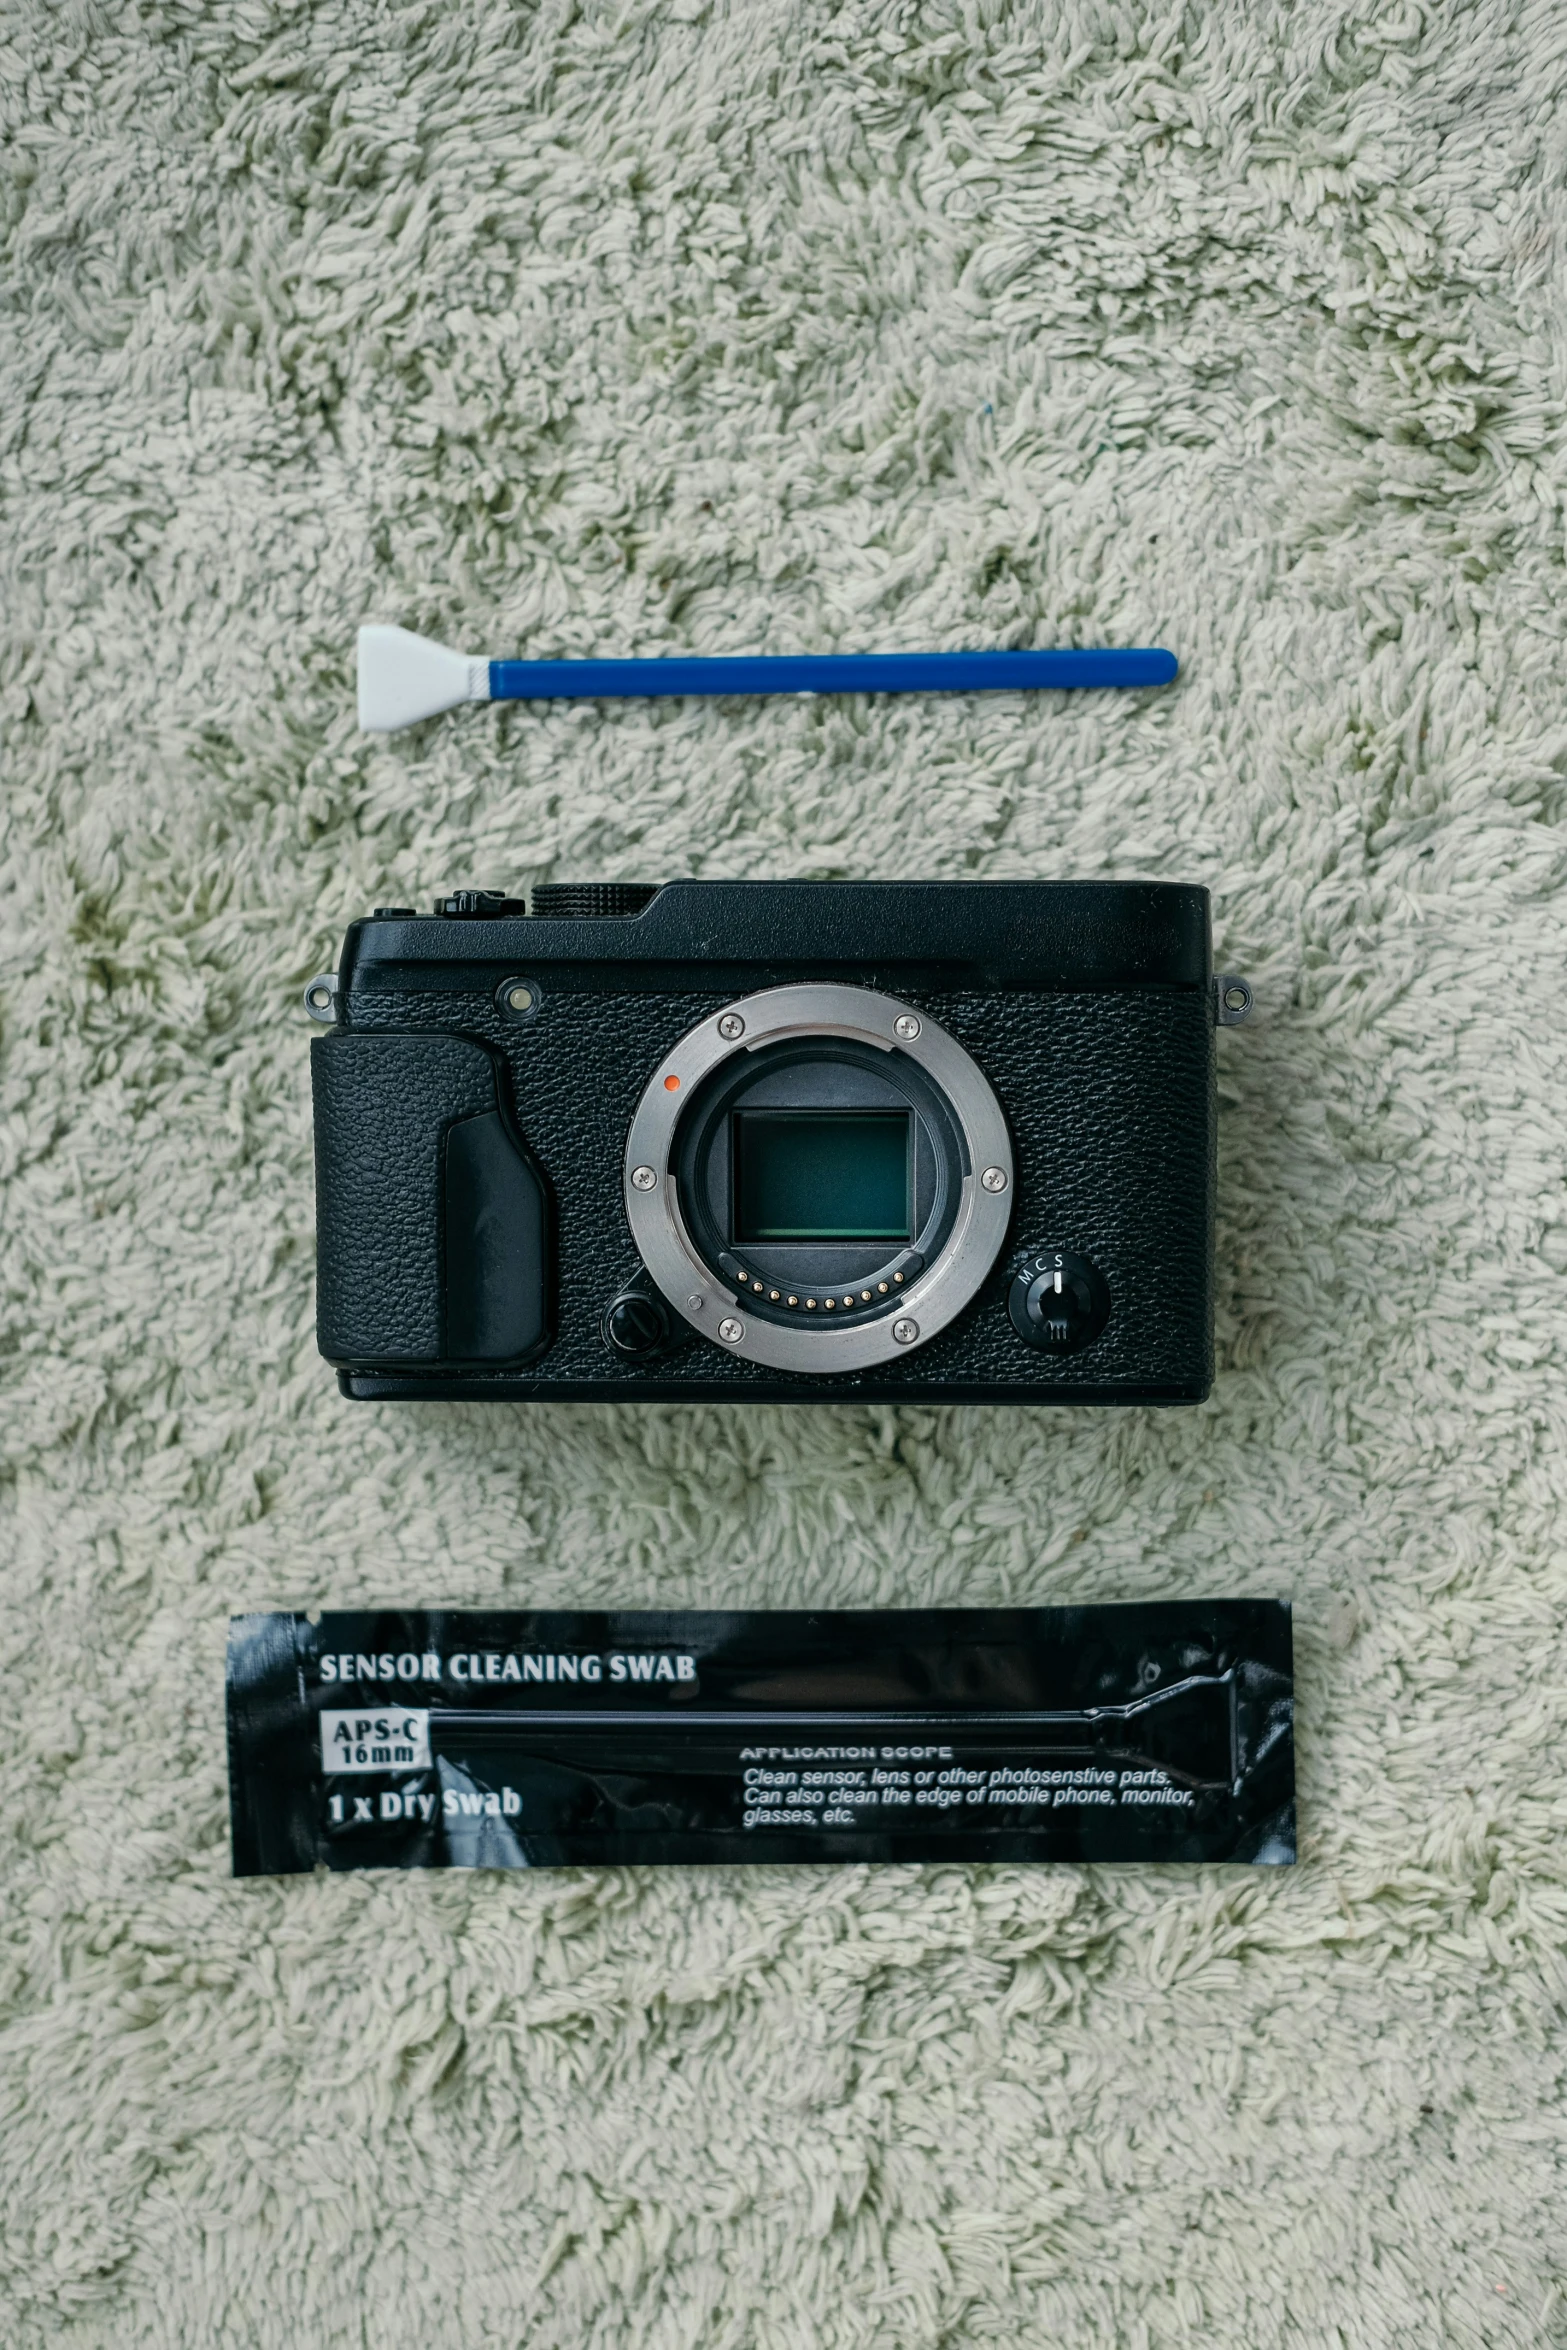 camera, battery and package lying on white carpet